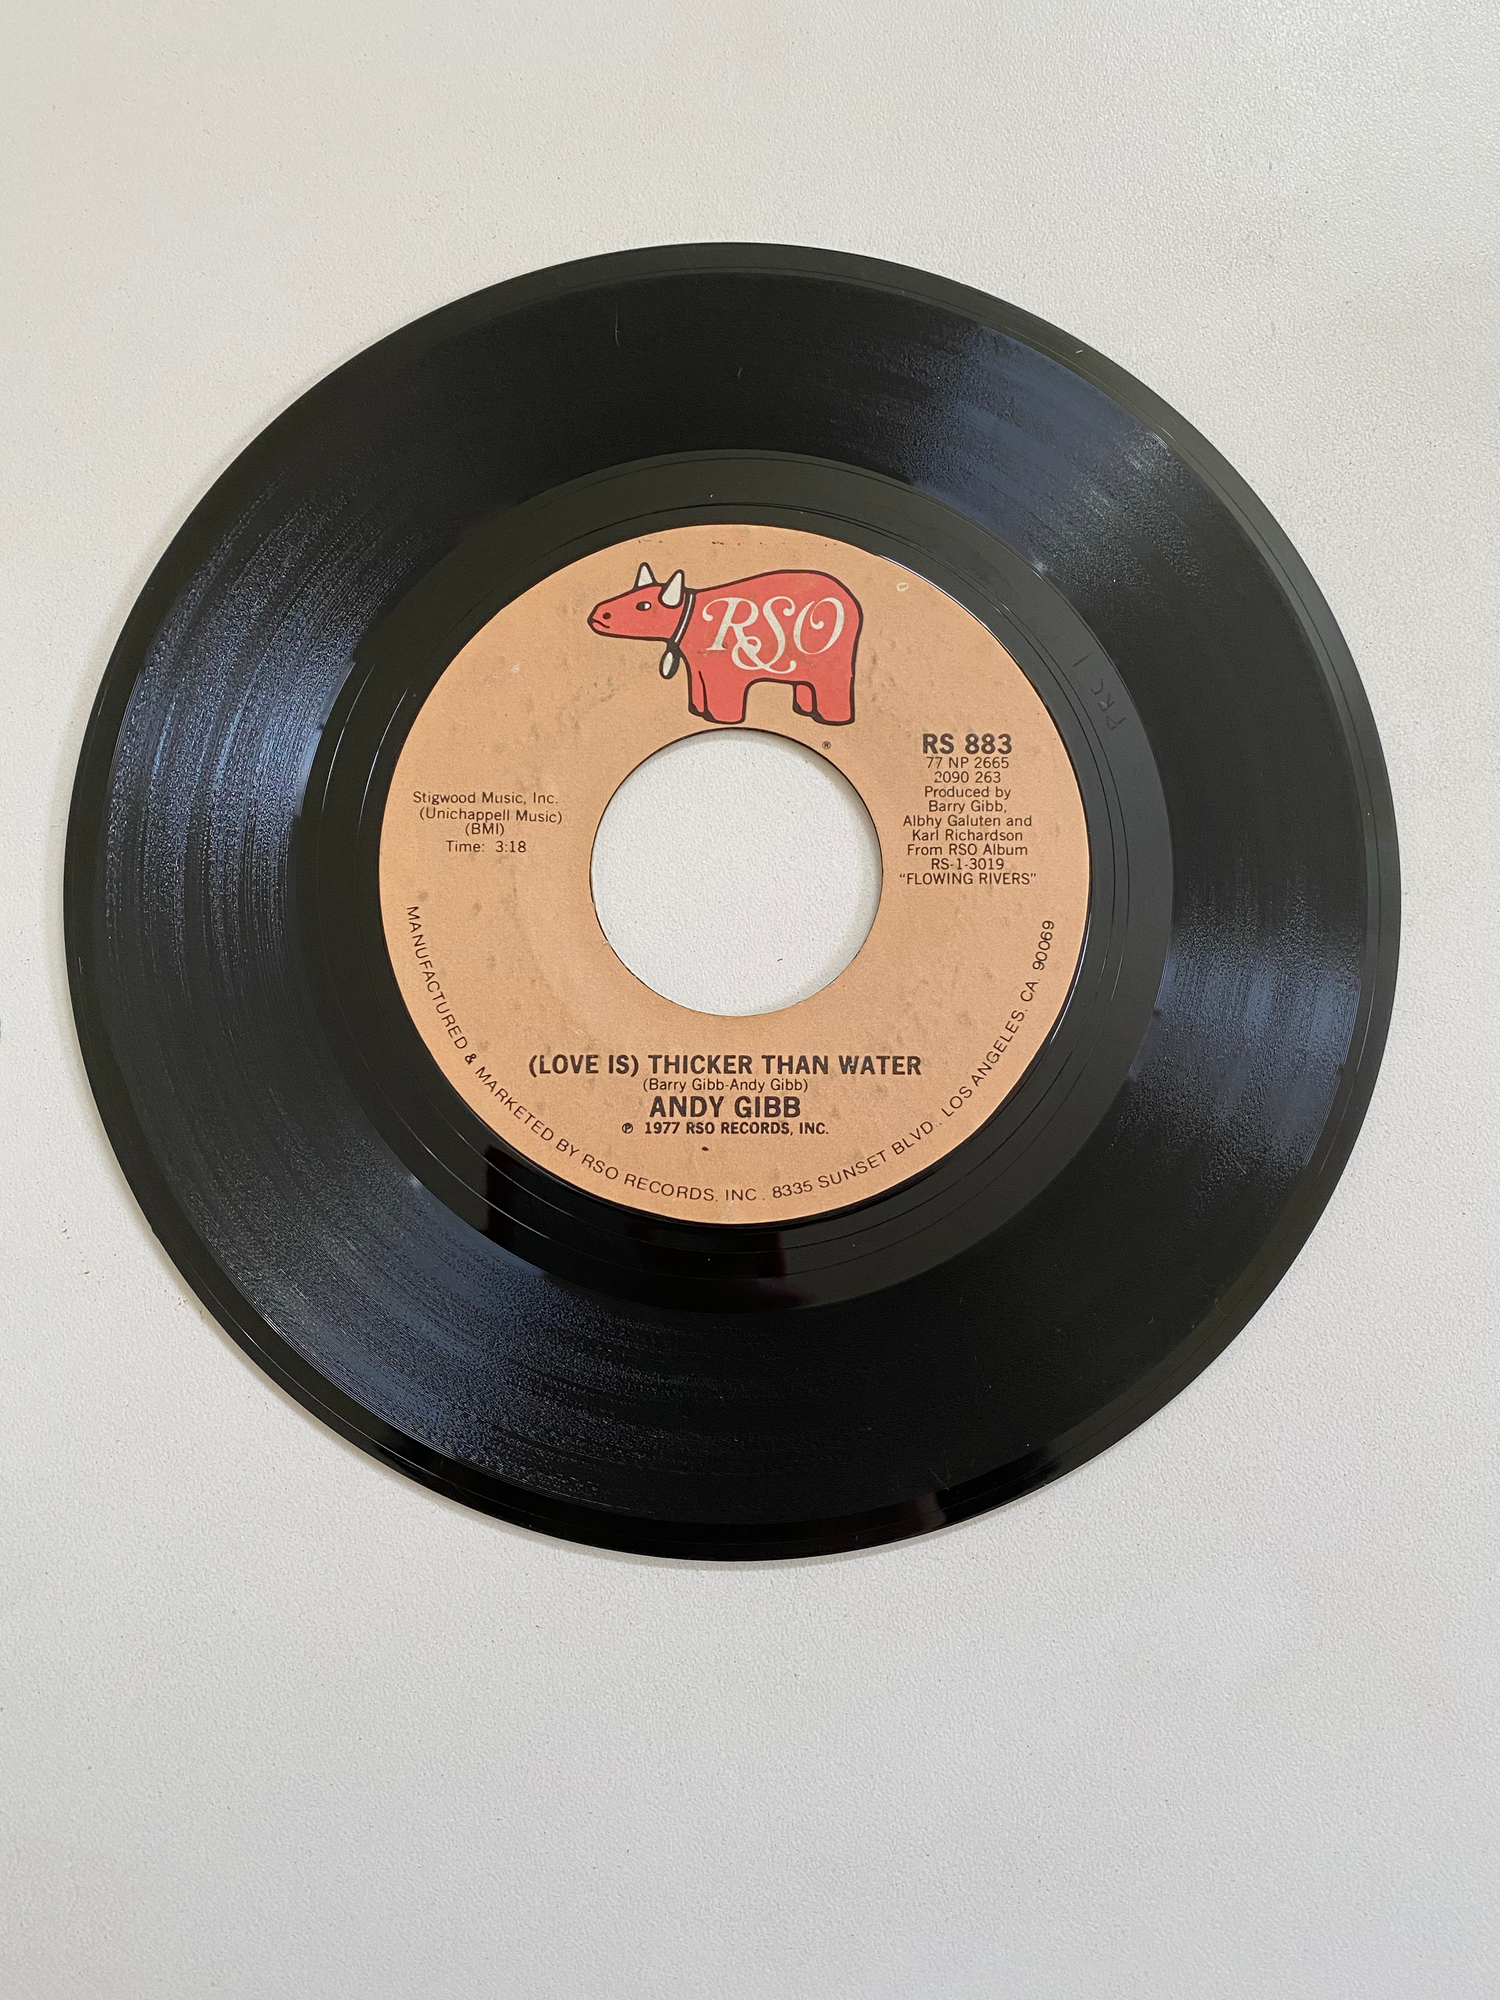 Andy Gibb - Words and Music | 45 The Vintedge Co.